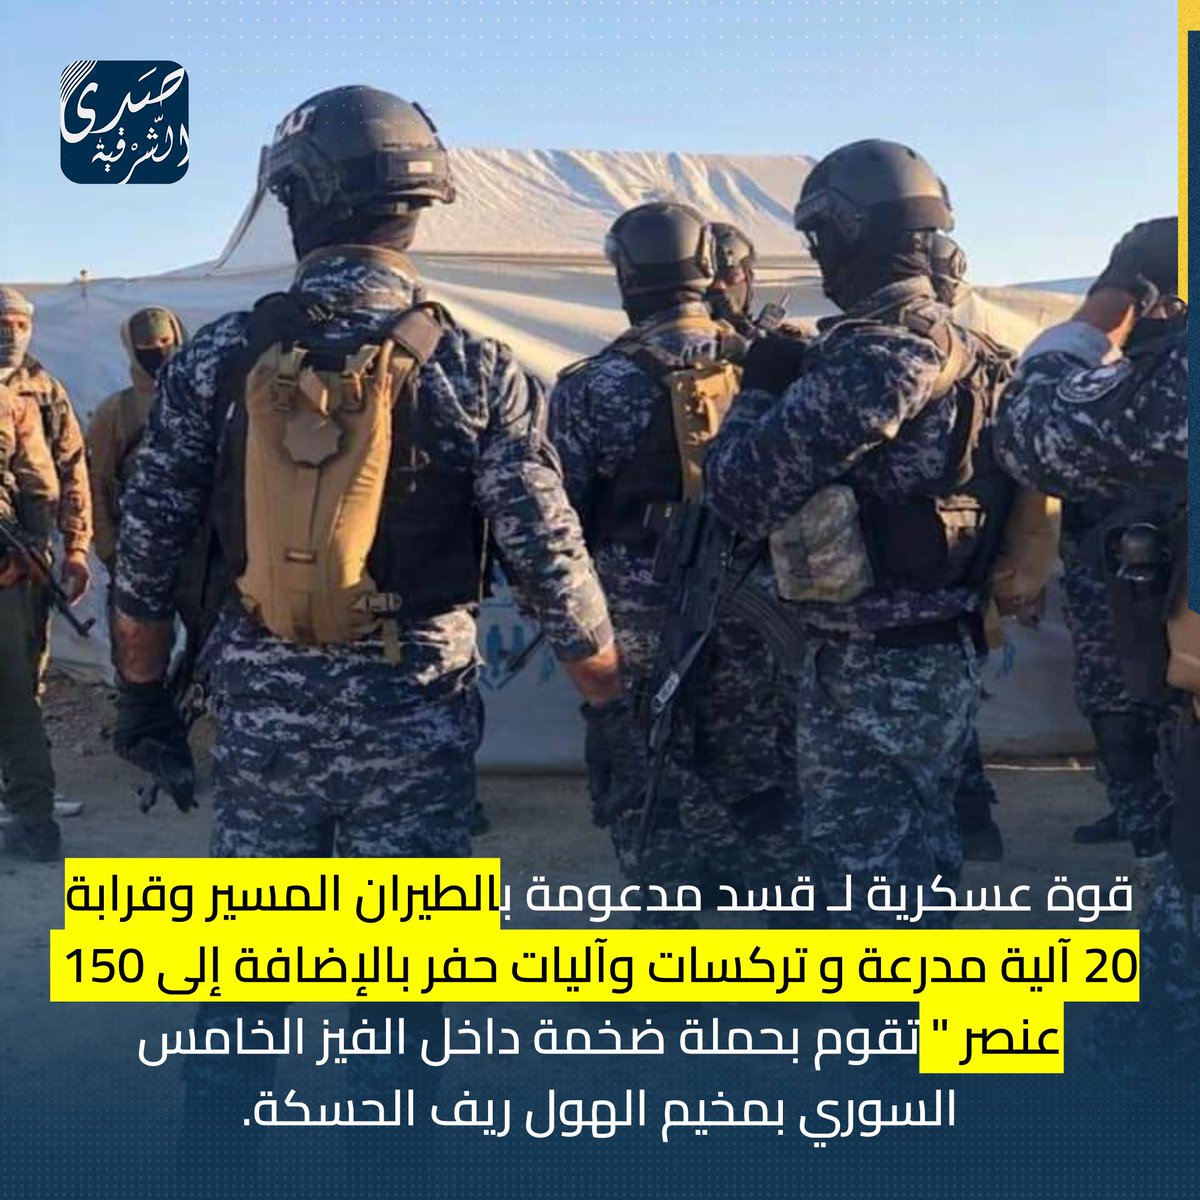 A large military force of the Asayish, commandos and HAT forces of the SDF is conducting an inspection campaign inside the Fifth sector in Al-Hol camp in the countryside of Al-Hasakah. According to him, the military force is supported by drones and by about 20 armored vehicles, tractors and drilling vehicles, in addition to 150 personnel.